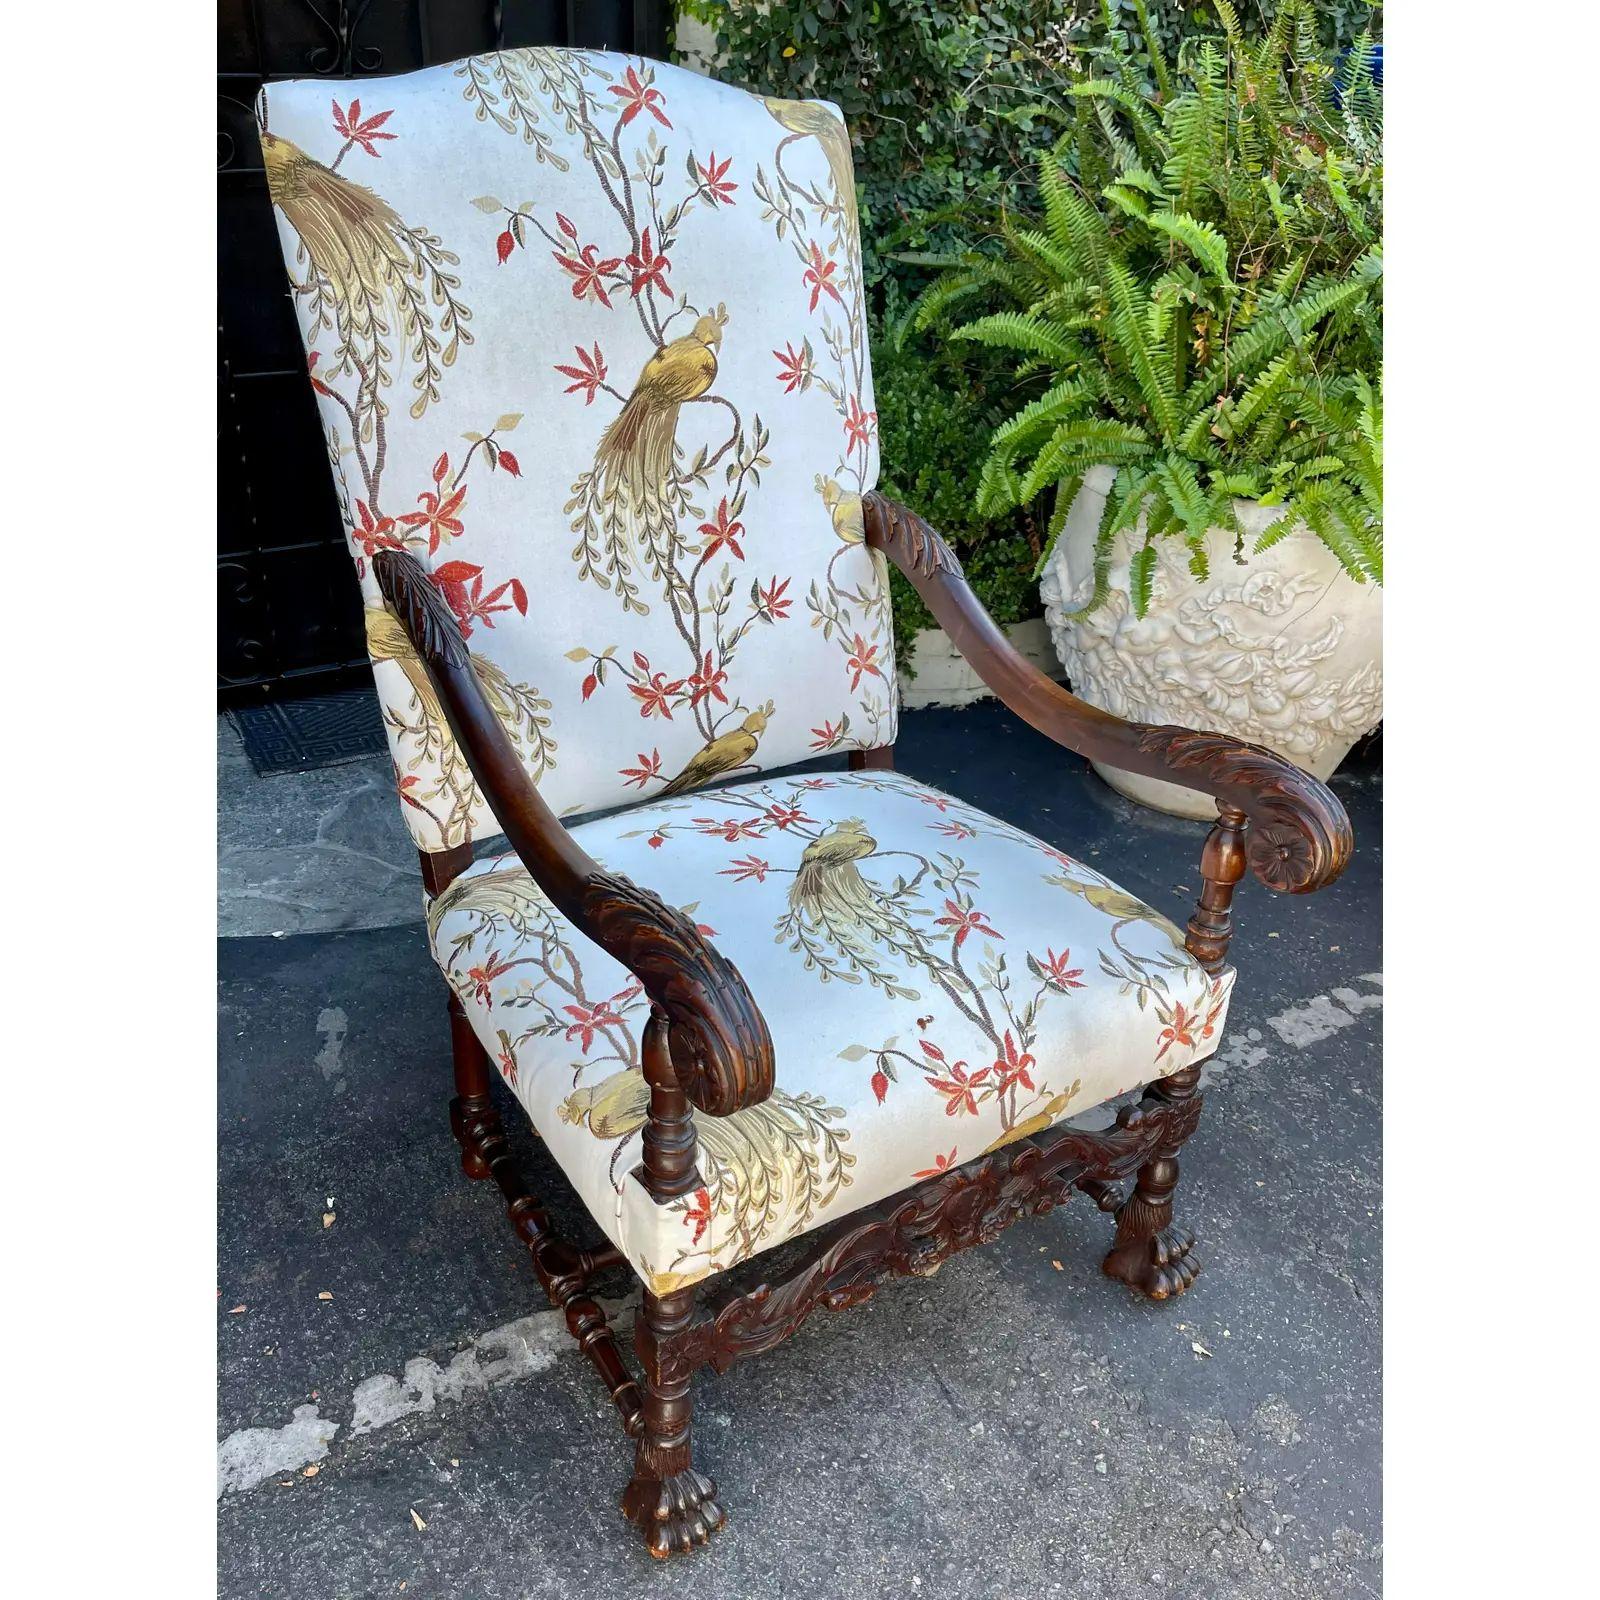 Spanish Colonial Antique Carved Walnut Throne Chair with Embroidered Bird Fabric, 19th Century